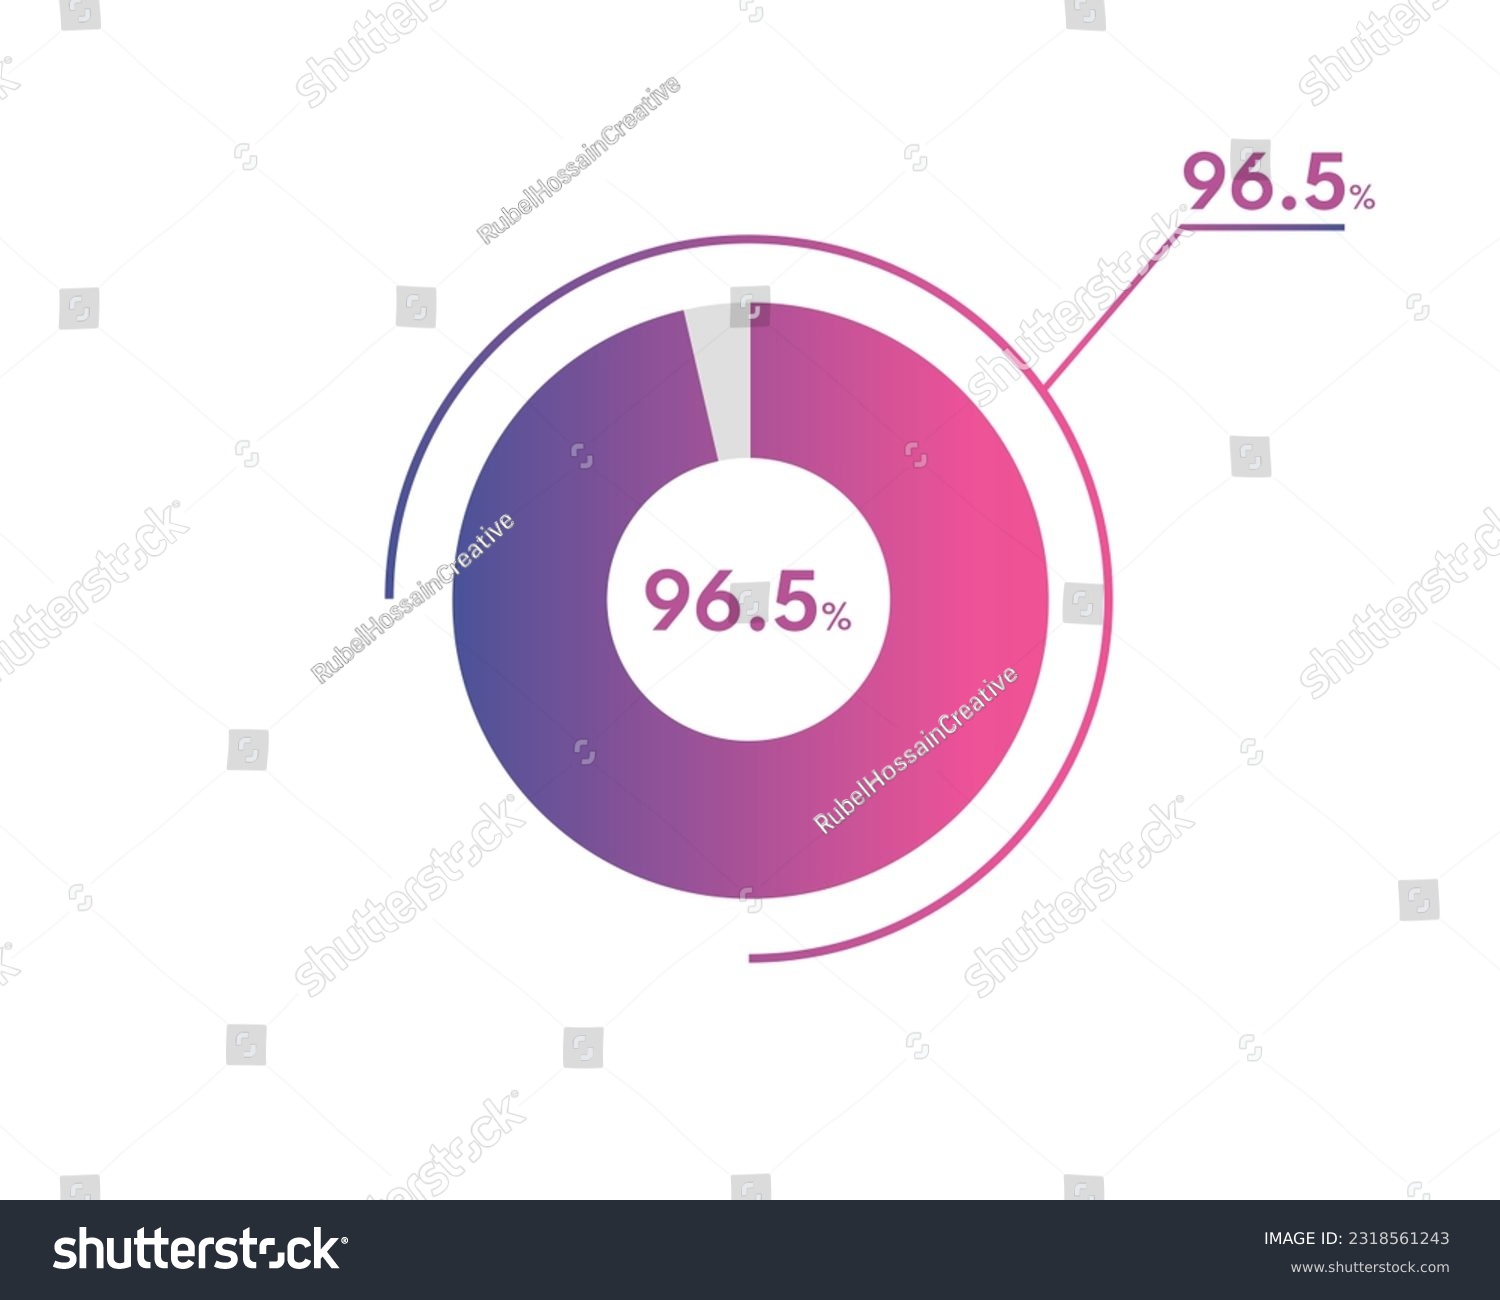 SVG of 96.5 Percentage circle diagrams Infographics vector, circle diagram business illustration, Designing the 96.5% Segment in the Pie Chart. svg